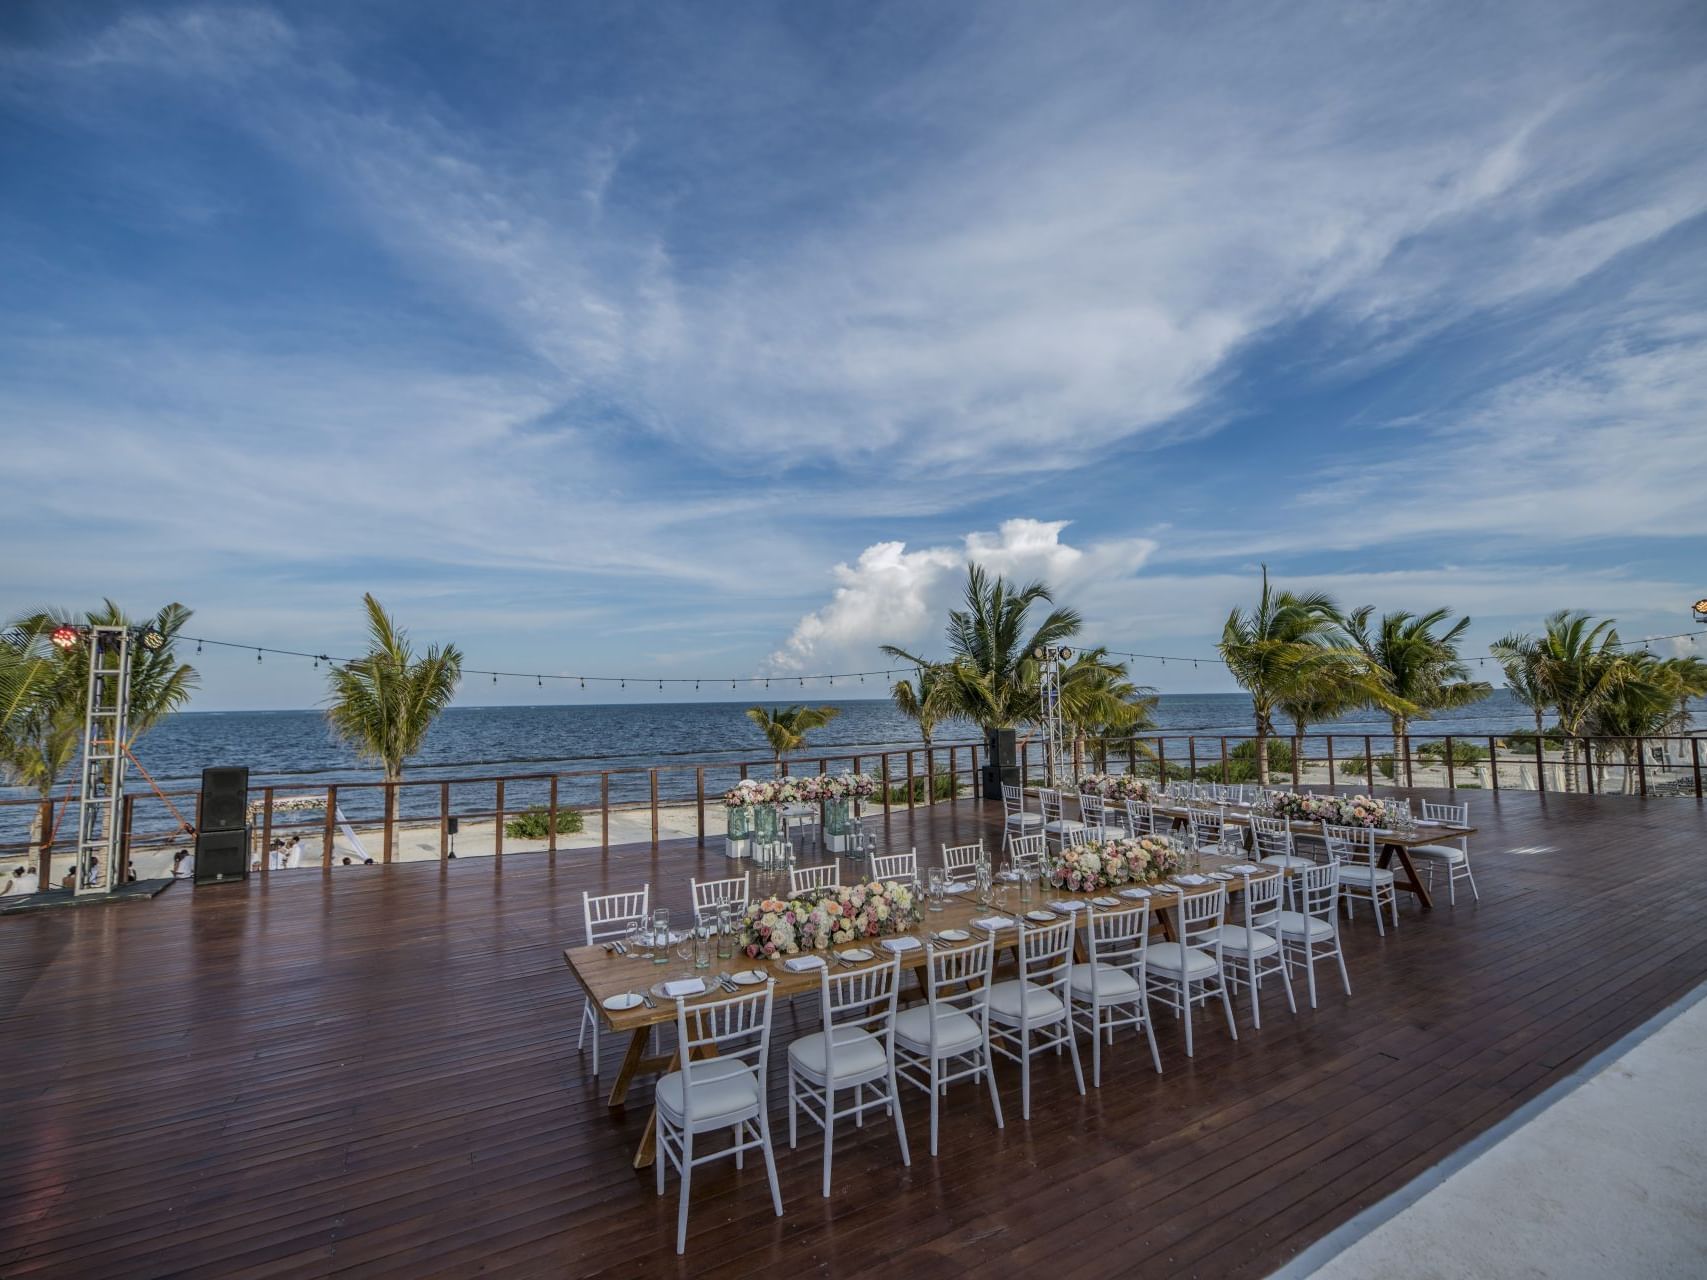 Dining table setup in the deck at Haven Riviera Cancun